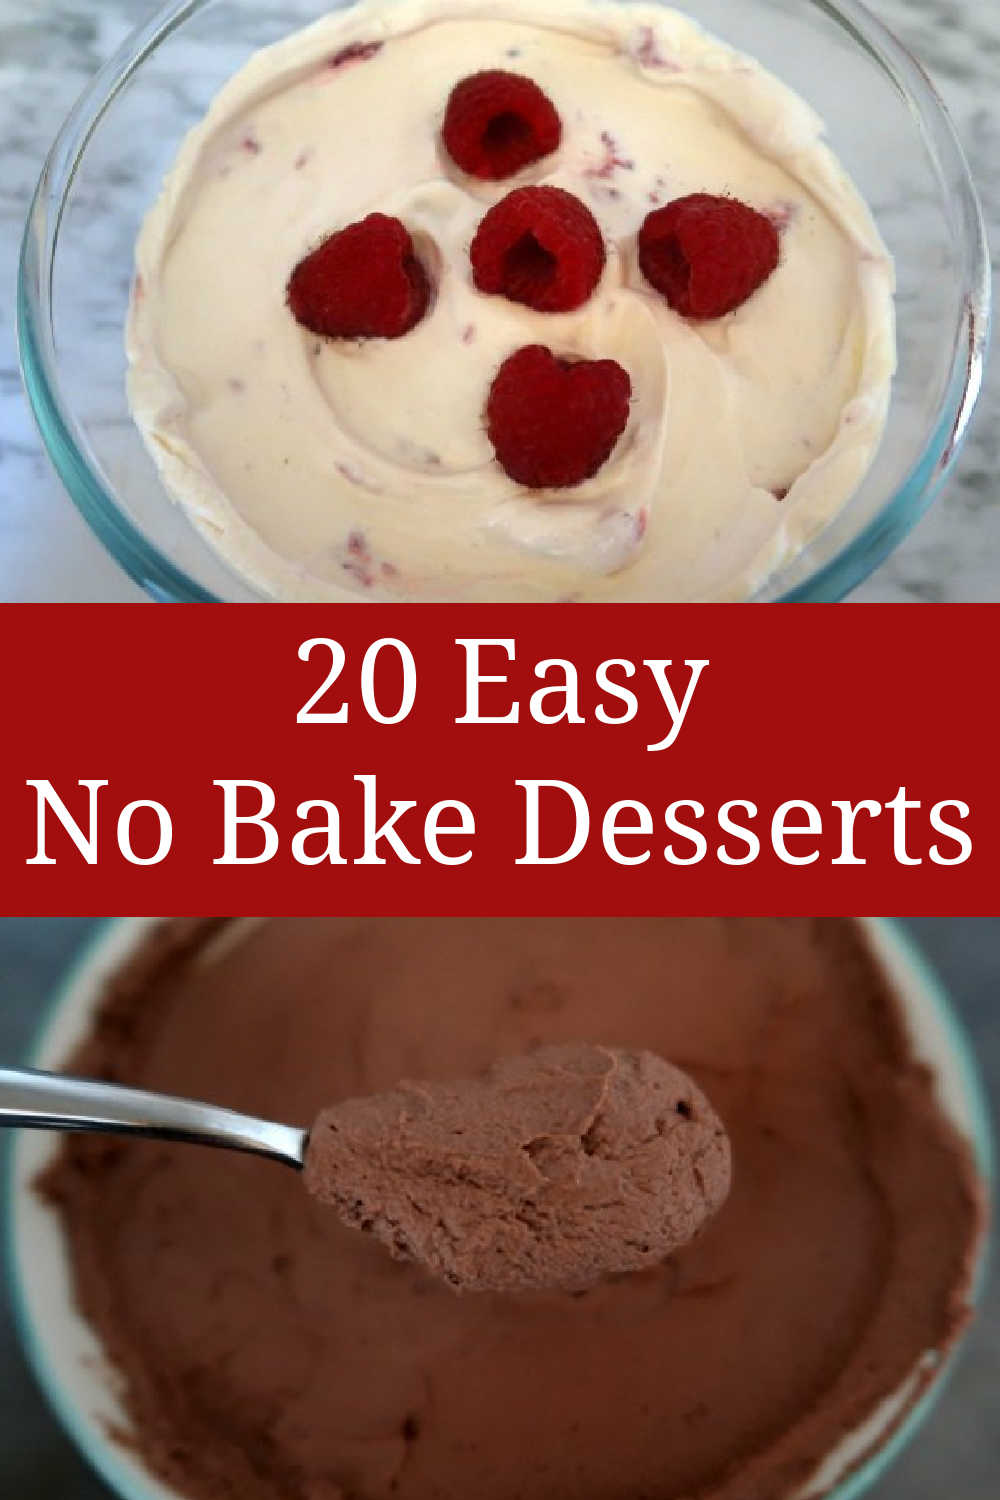 20 Easy No Bake Desserts - how to make the best sweet treats dessert recipes that need no baking and are perfect to enjoy during the warmer summer months.